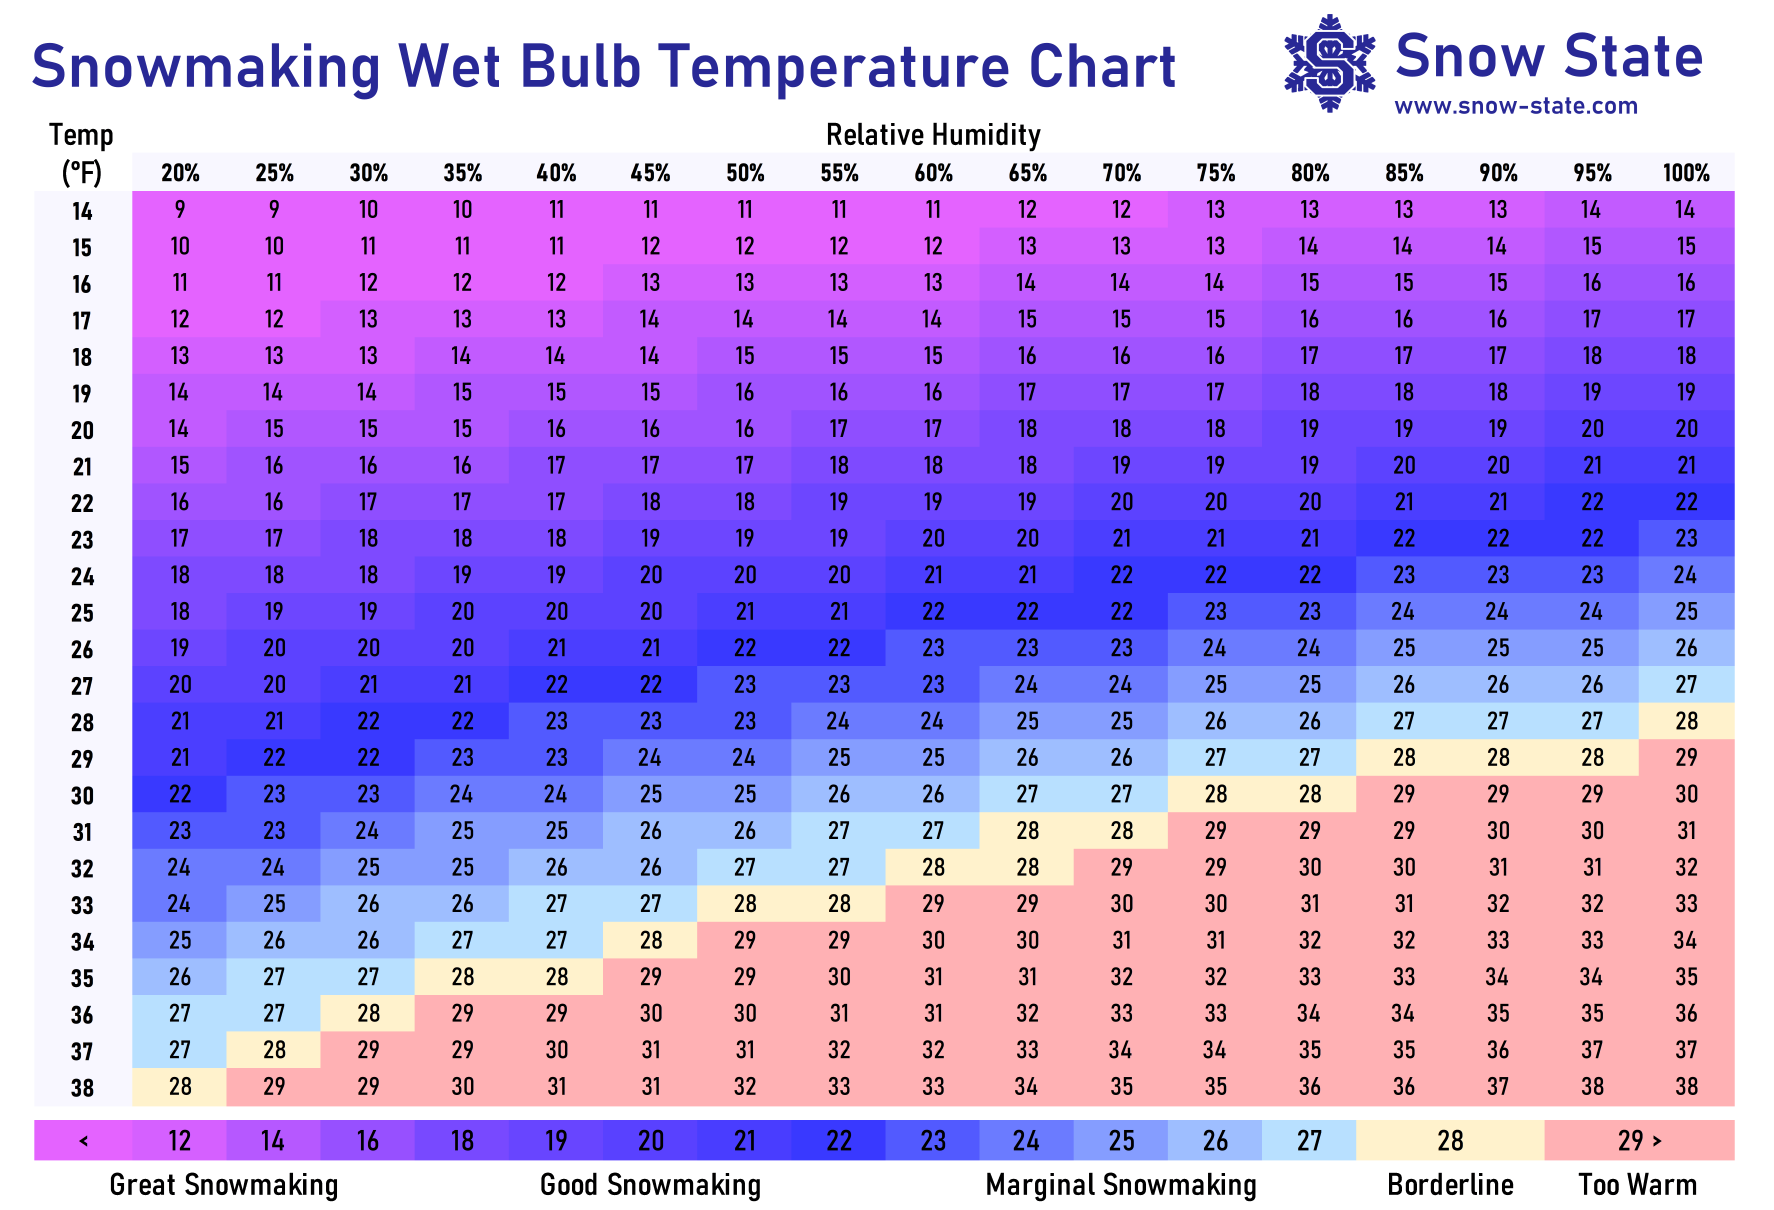 http://snow-state.com/wp-content/uploads/2021/12/wetbulb_chart.png